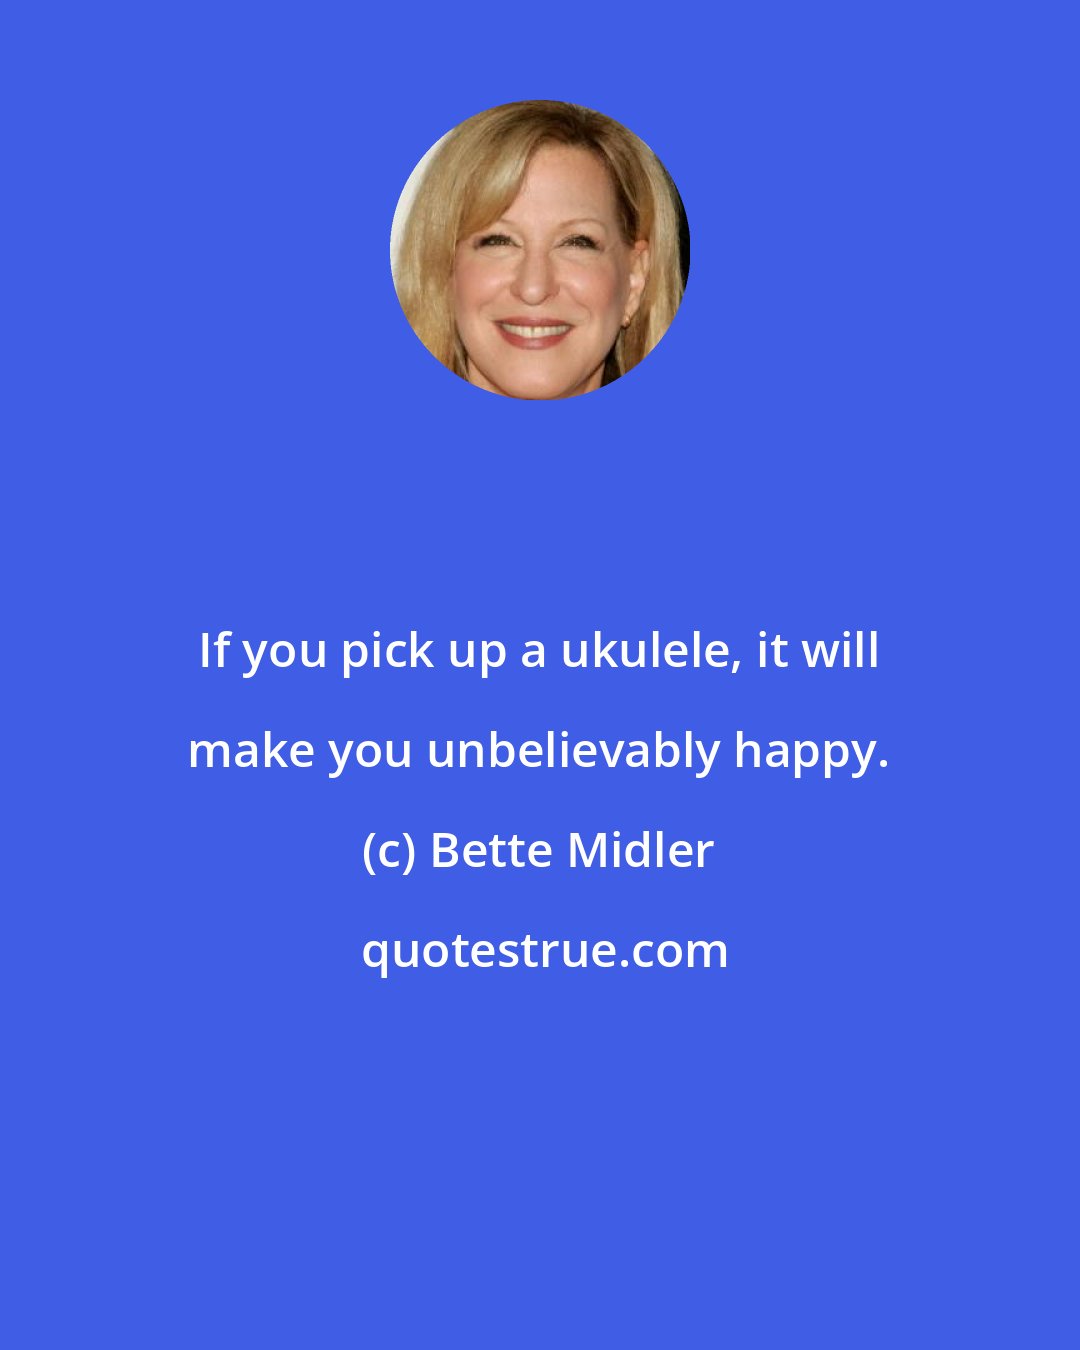 Bette Midler: If you pick up a ukulele, it will make you unbelievably happy.